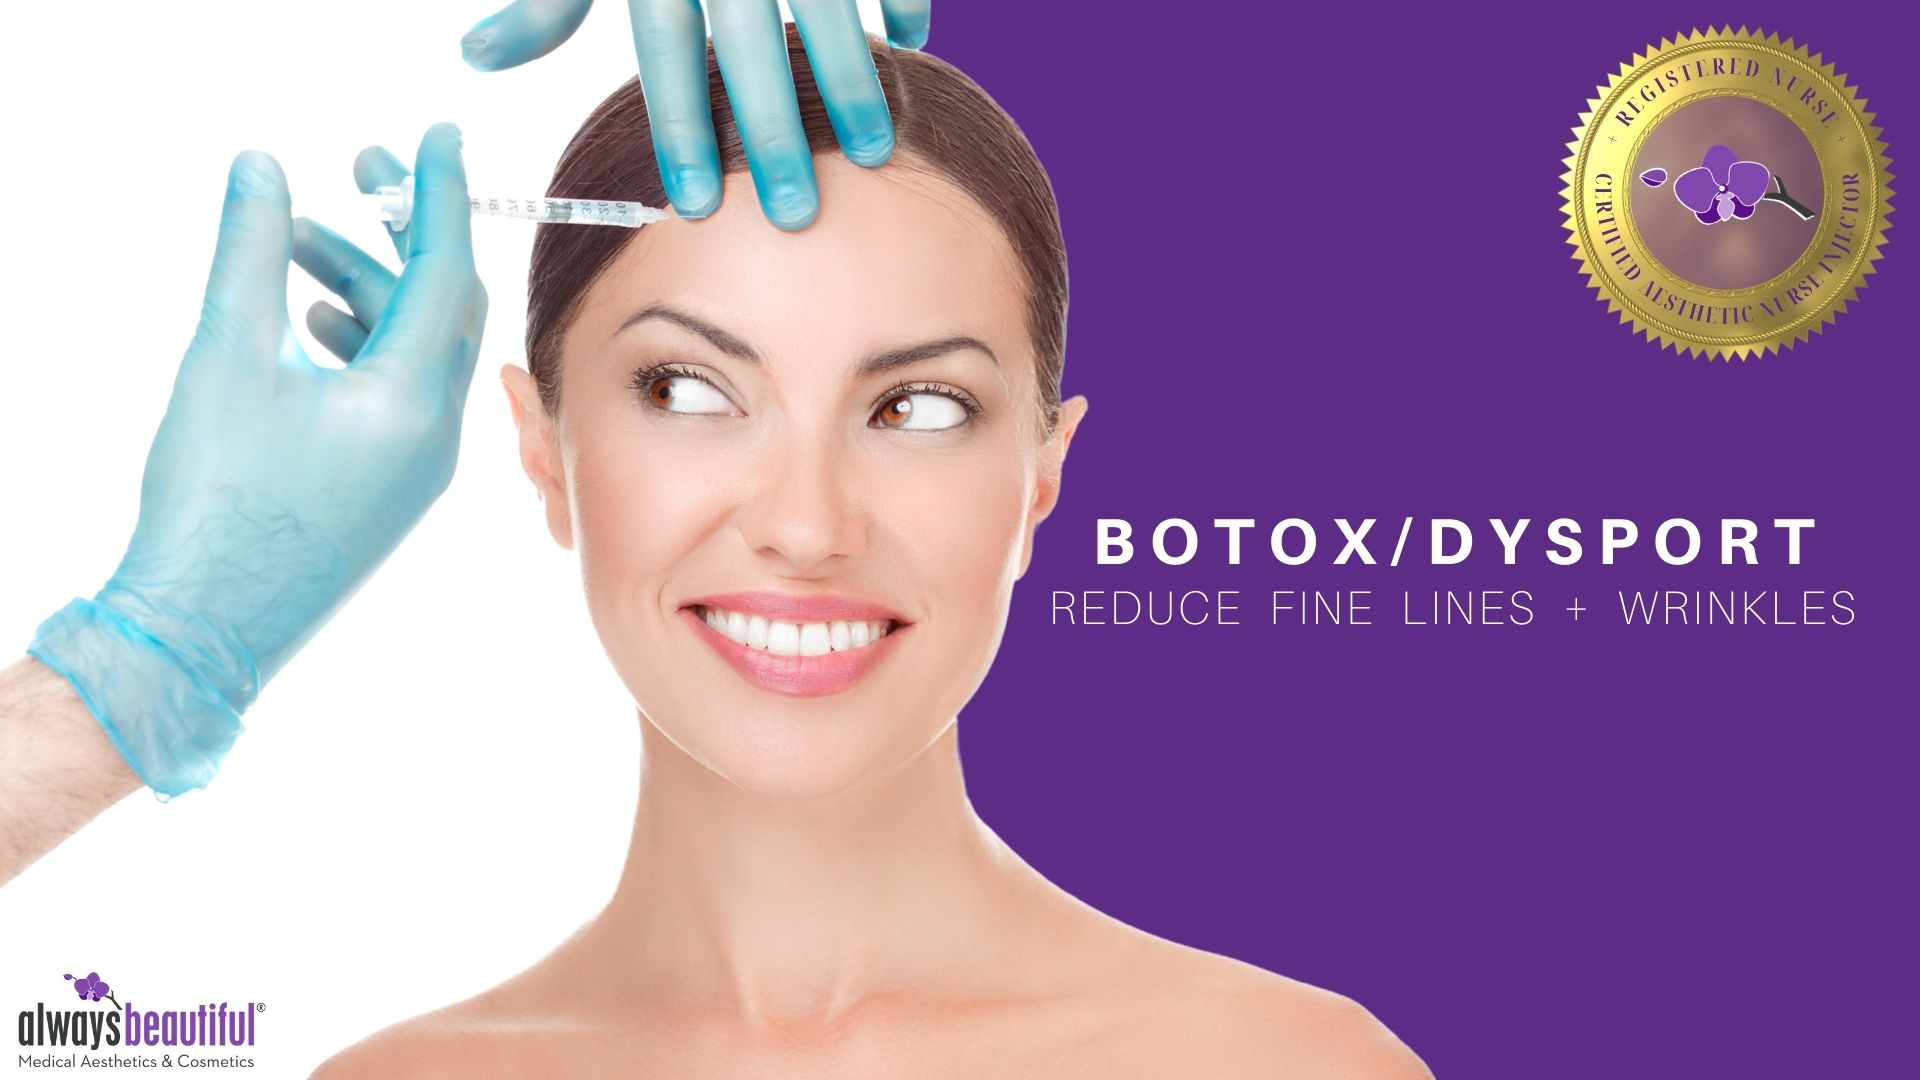 Woman receiving botox and dysport from a skilled injector at Always Beautiful.